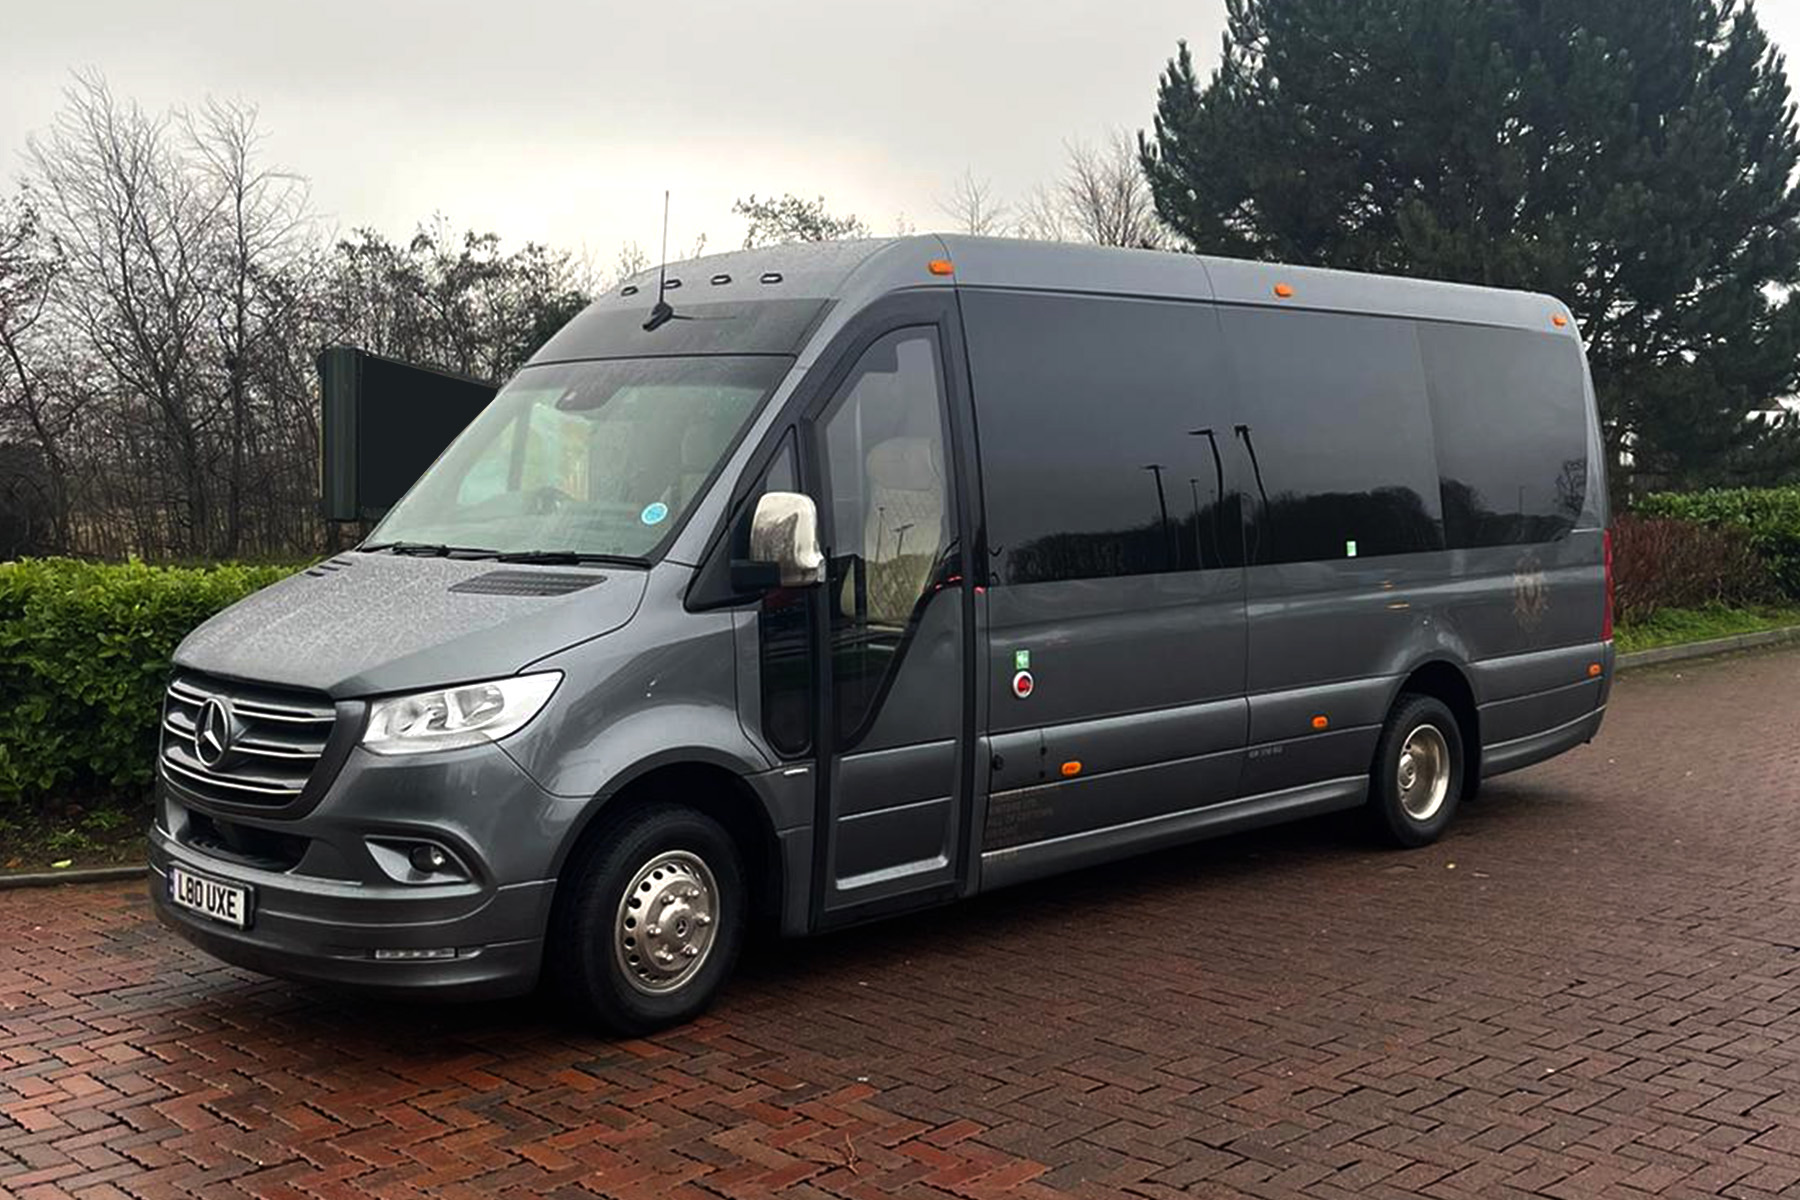 Essential Tips for Planning Your UK Trip with a 16 Seater Minibus Hire